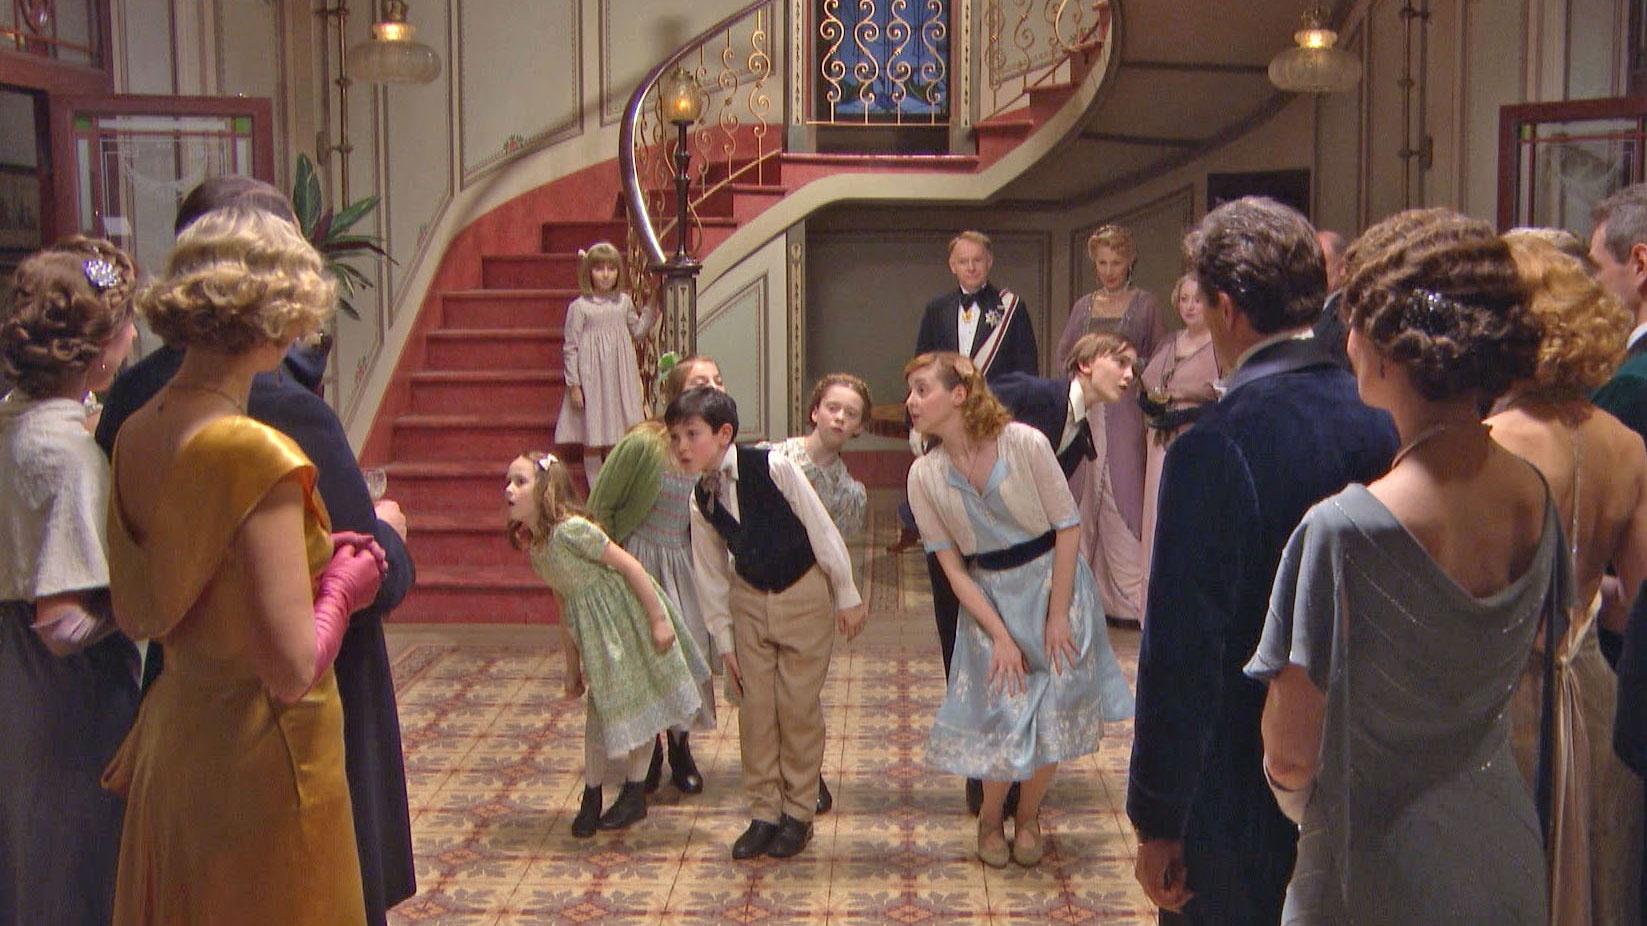 Scene from the 2015 live U.K. broadcast version of “The Sound of Music.”